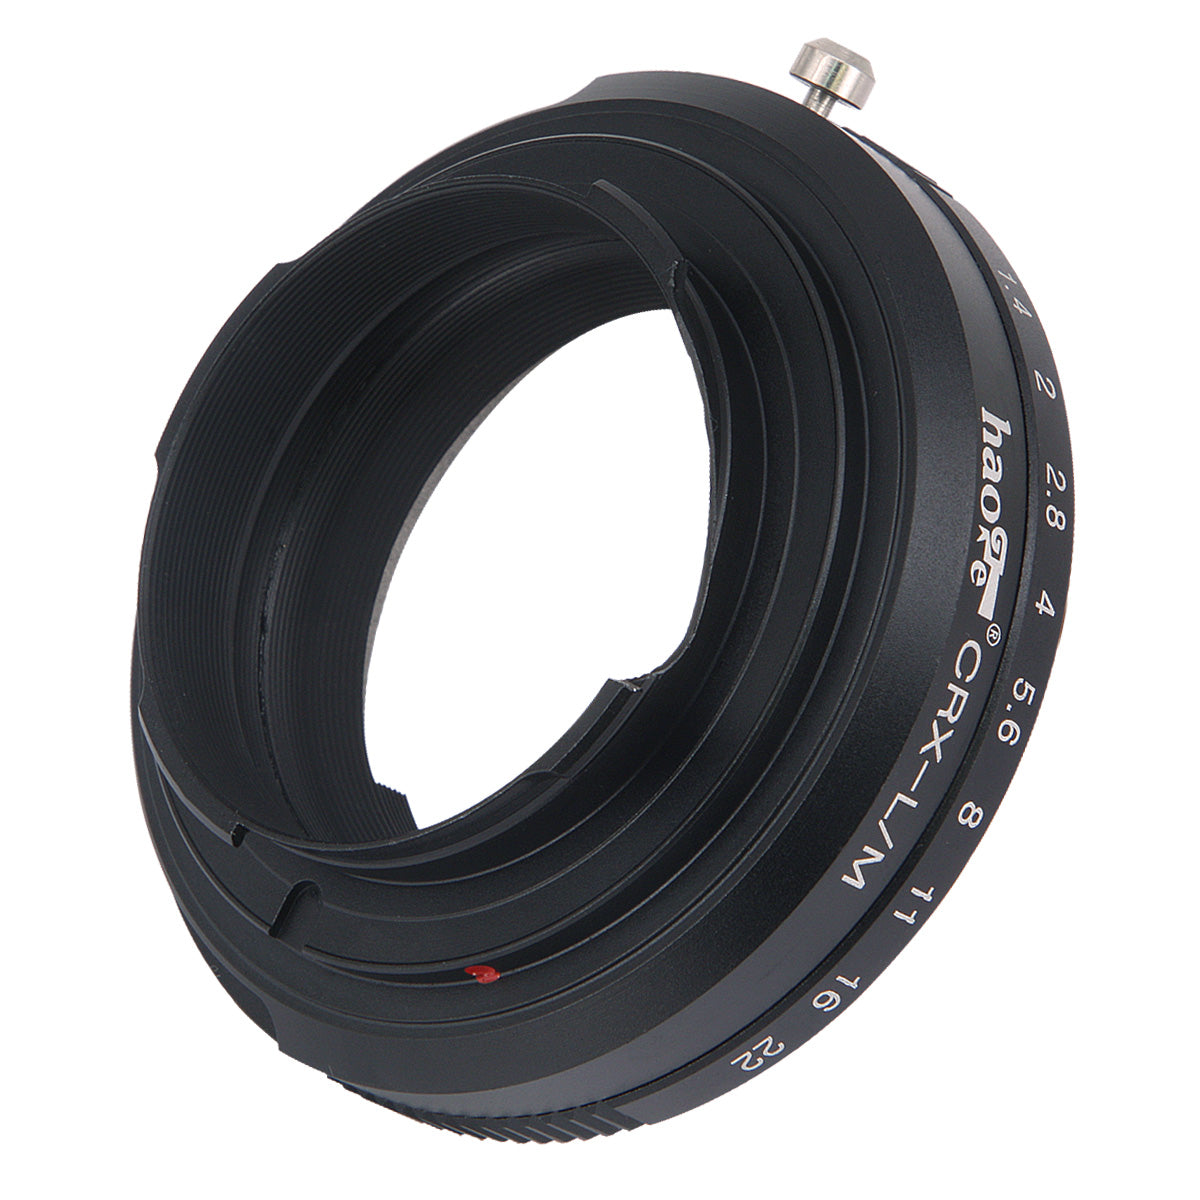 Haoge Manual Lens Adapter for Contarex CRX Mount Lens to Leica M LM mount Camera such as M240, M262, M3, M2, M1, M4, M5, M6, MP, M7, M8, M9, M9-P, M Monochrom, M-E, M, M-P, M10, M-A